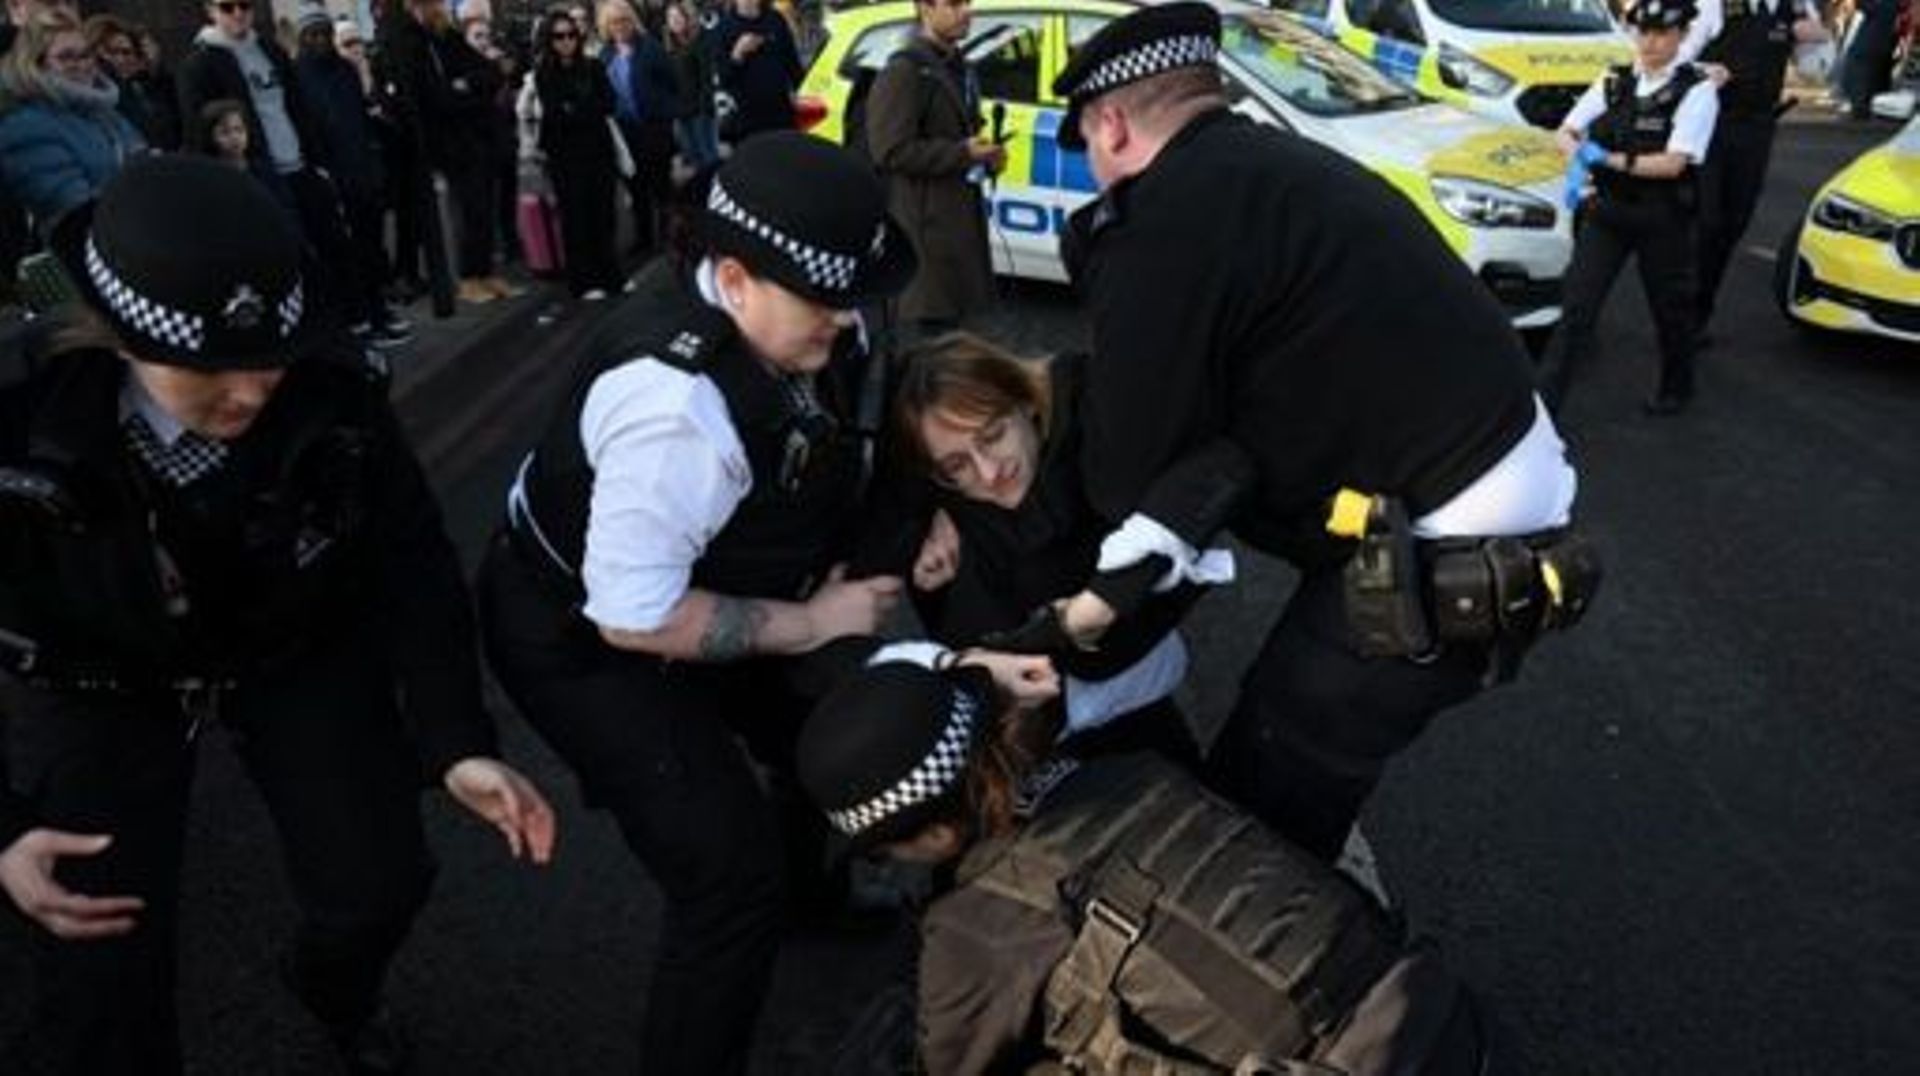 Police officers arrest and remove activists from the animal and climate justice group Animal Rebellion who were blocking the road during a demonstration on Westminster Bridge, in central London, on February 14, 2023.  Daniel LEAL / AFP